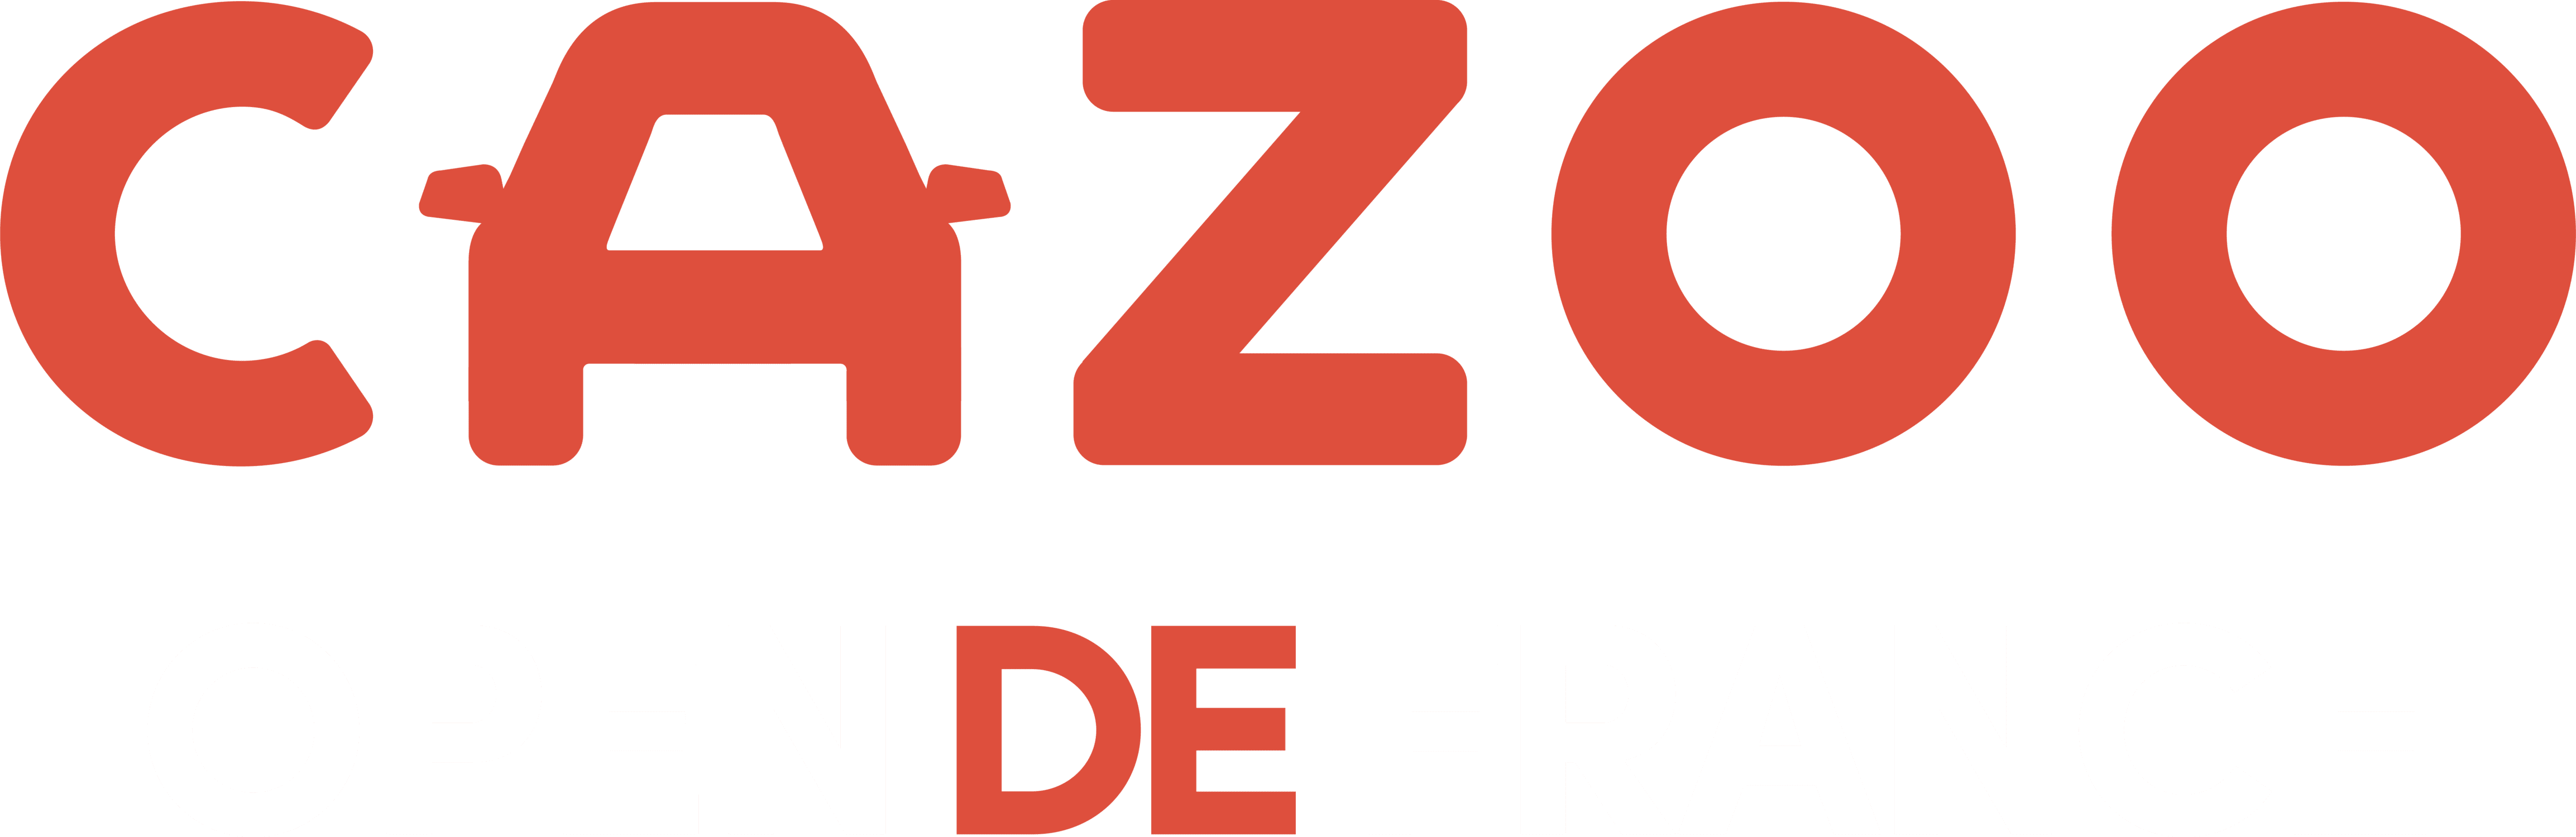 cazooopendefrance